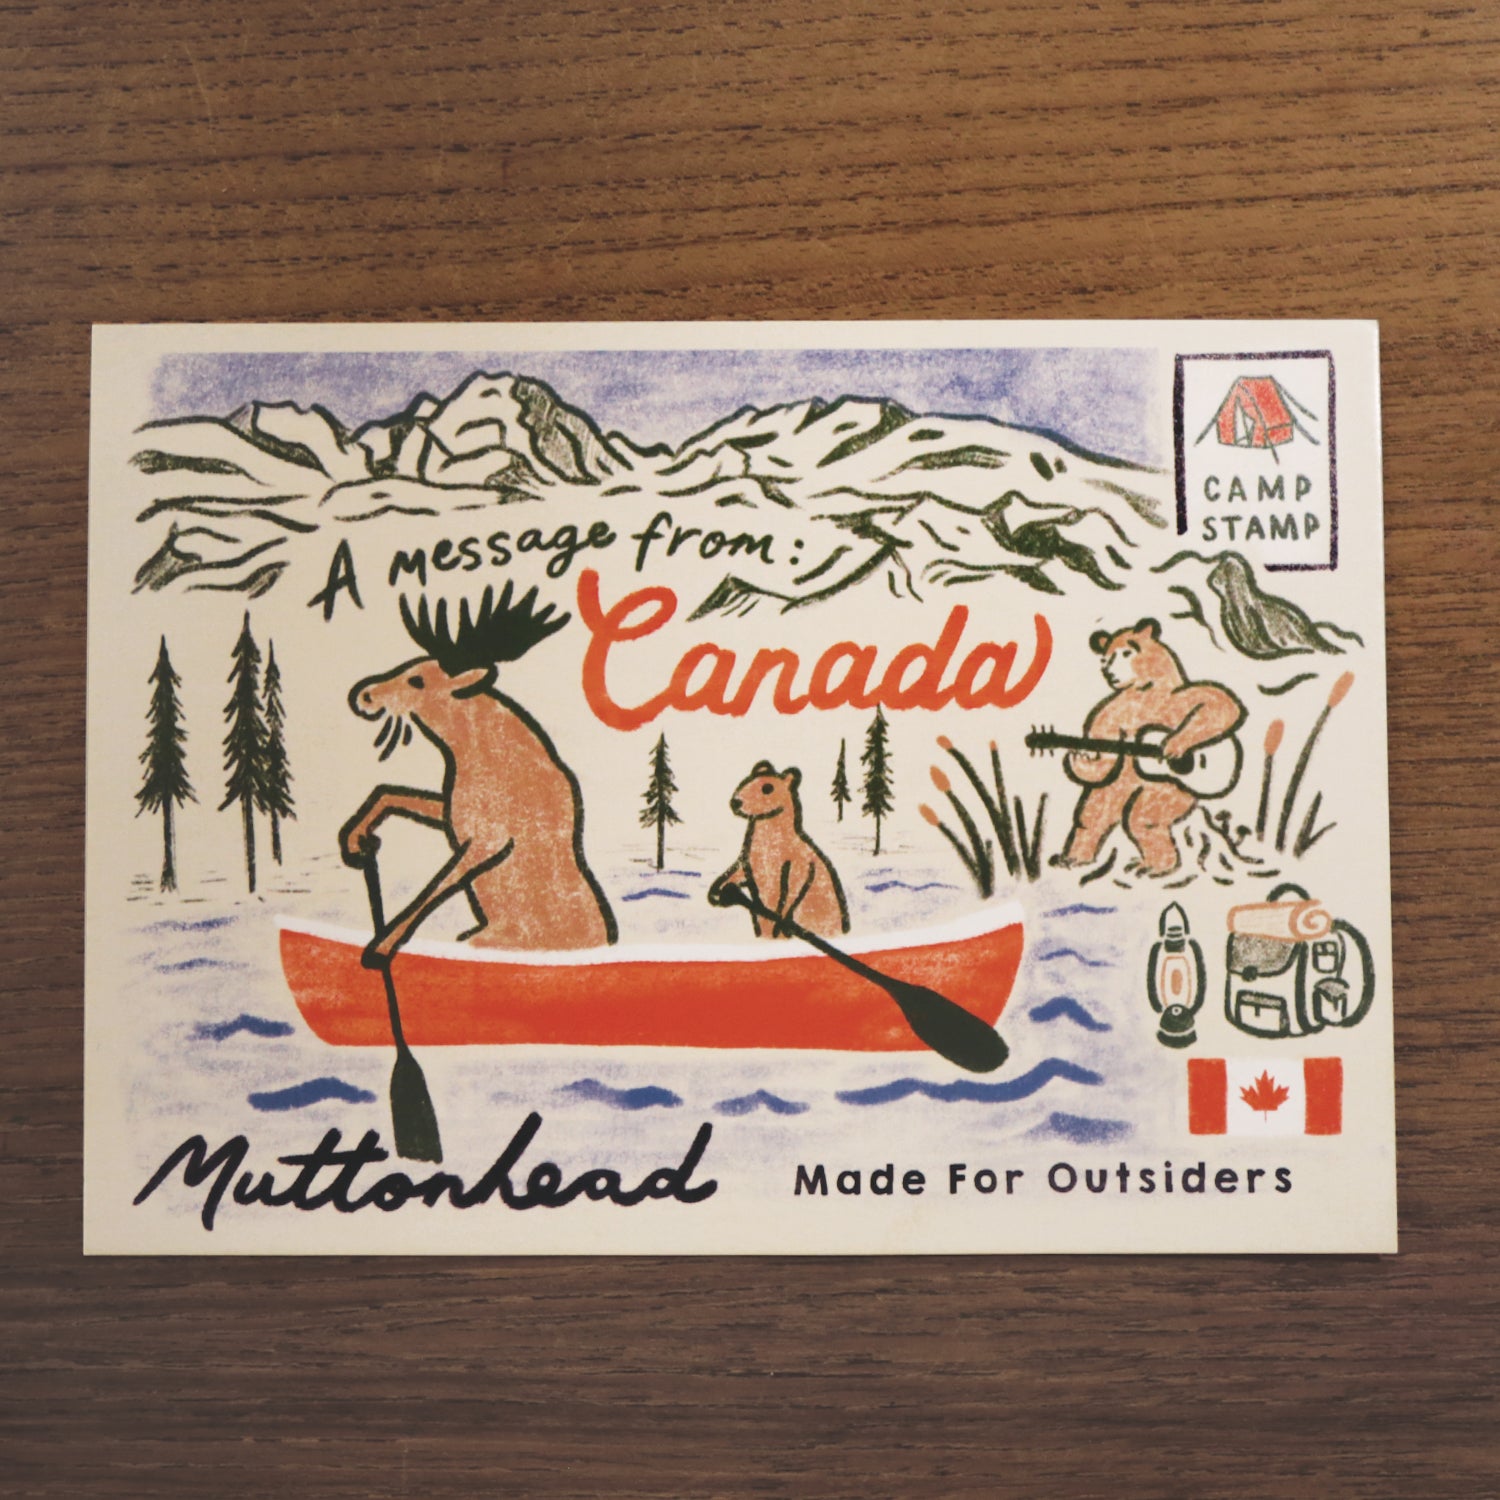 Postcard - A message from Canada